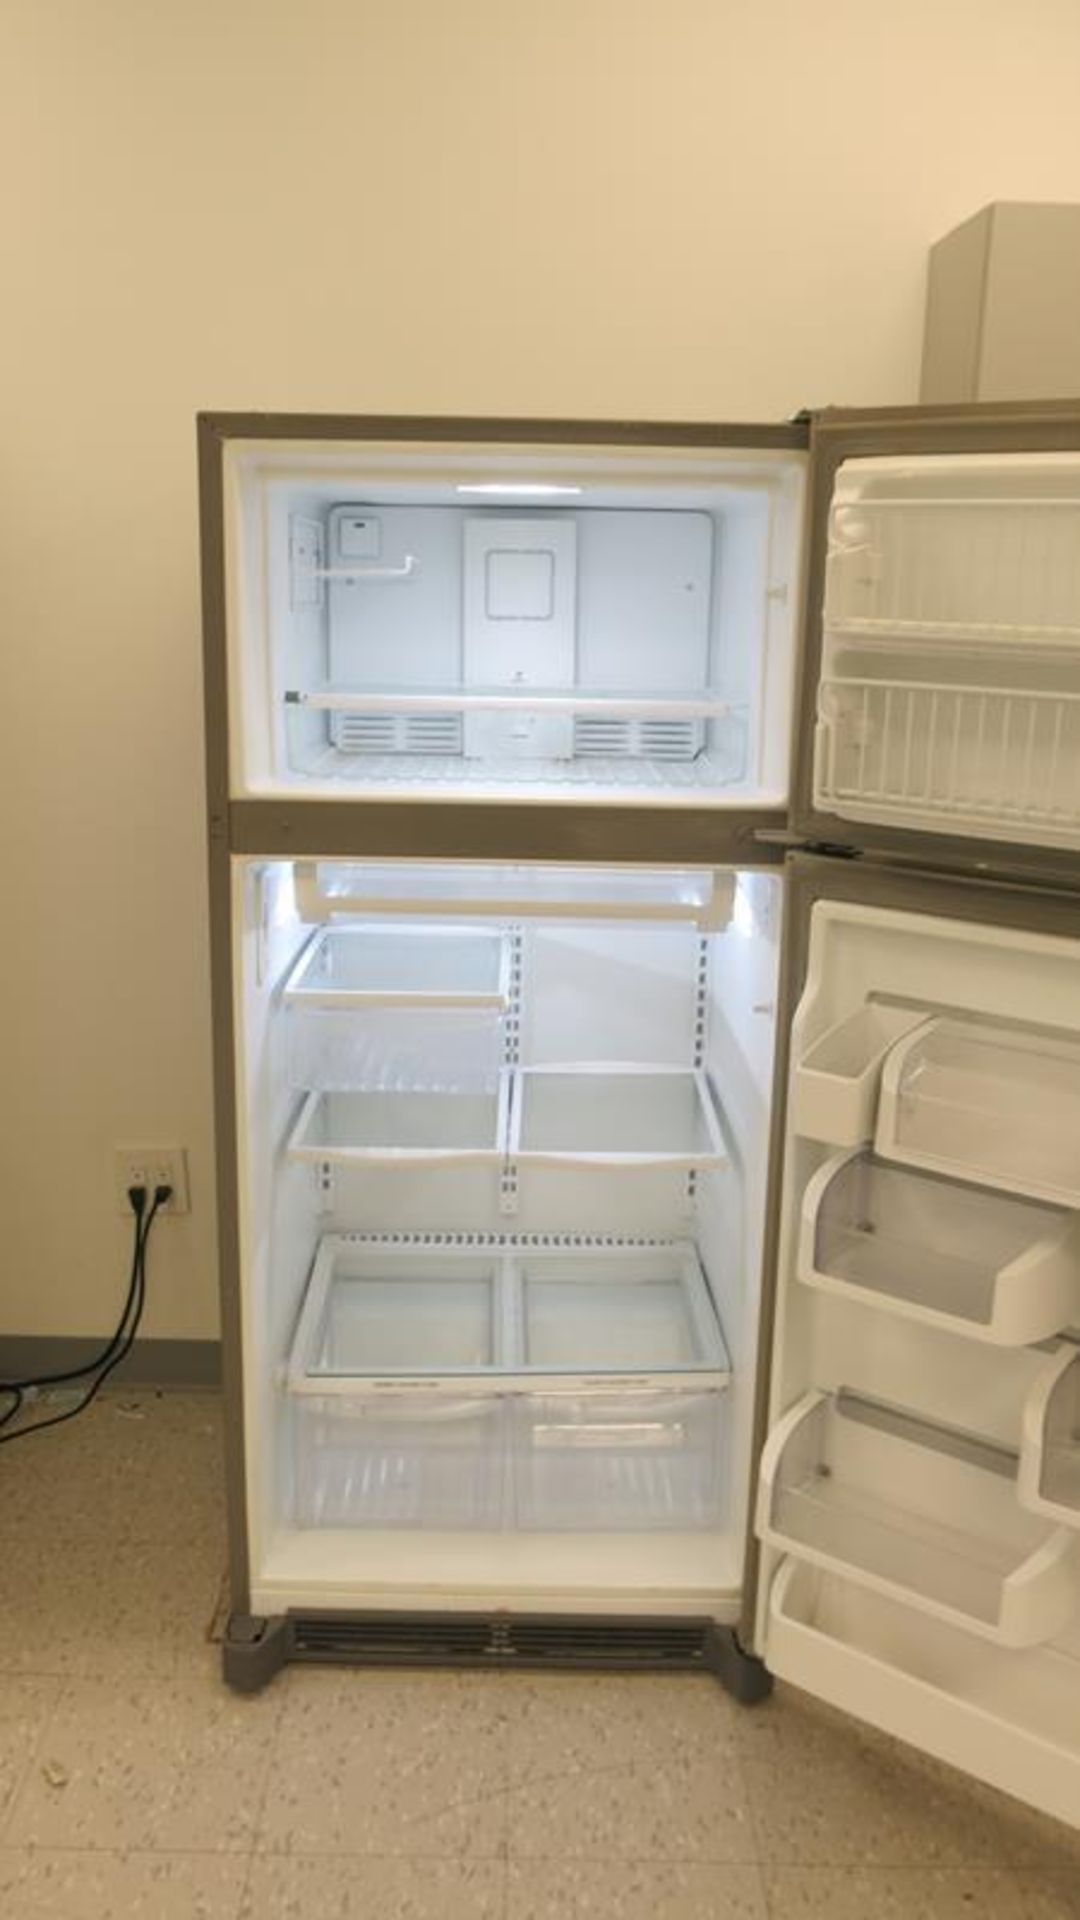 SEARS, 970R424530, STAINLESS STEEL, REFRIGERATOR WITH ICE MAKER, S/N BA44616819 - Image 2 of 3